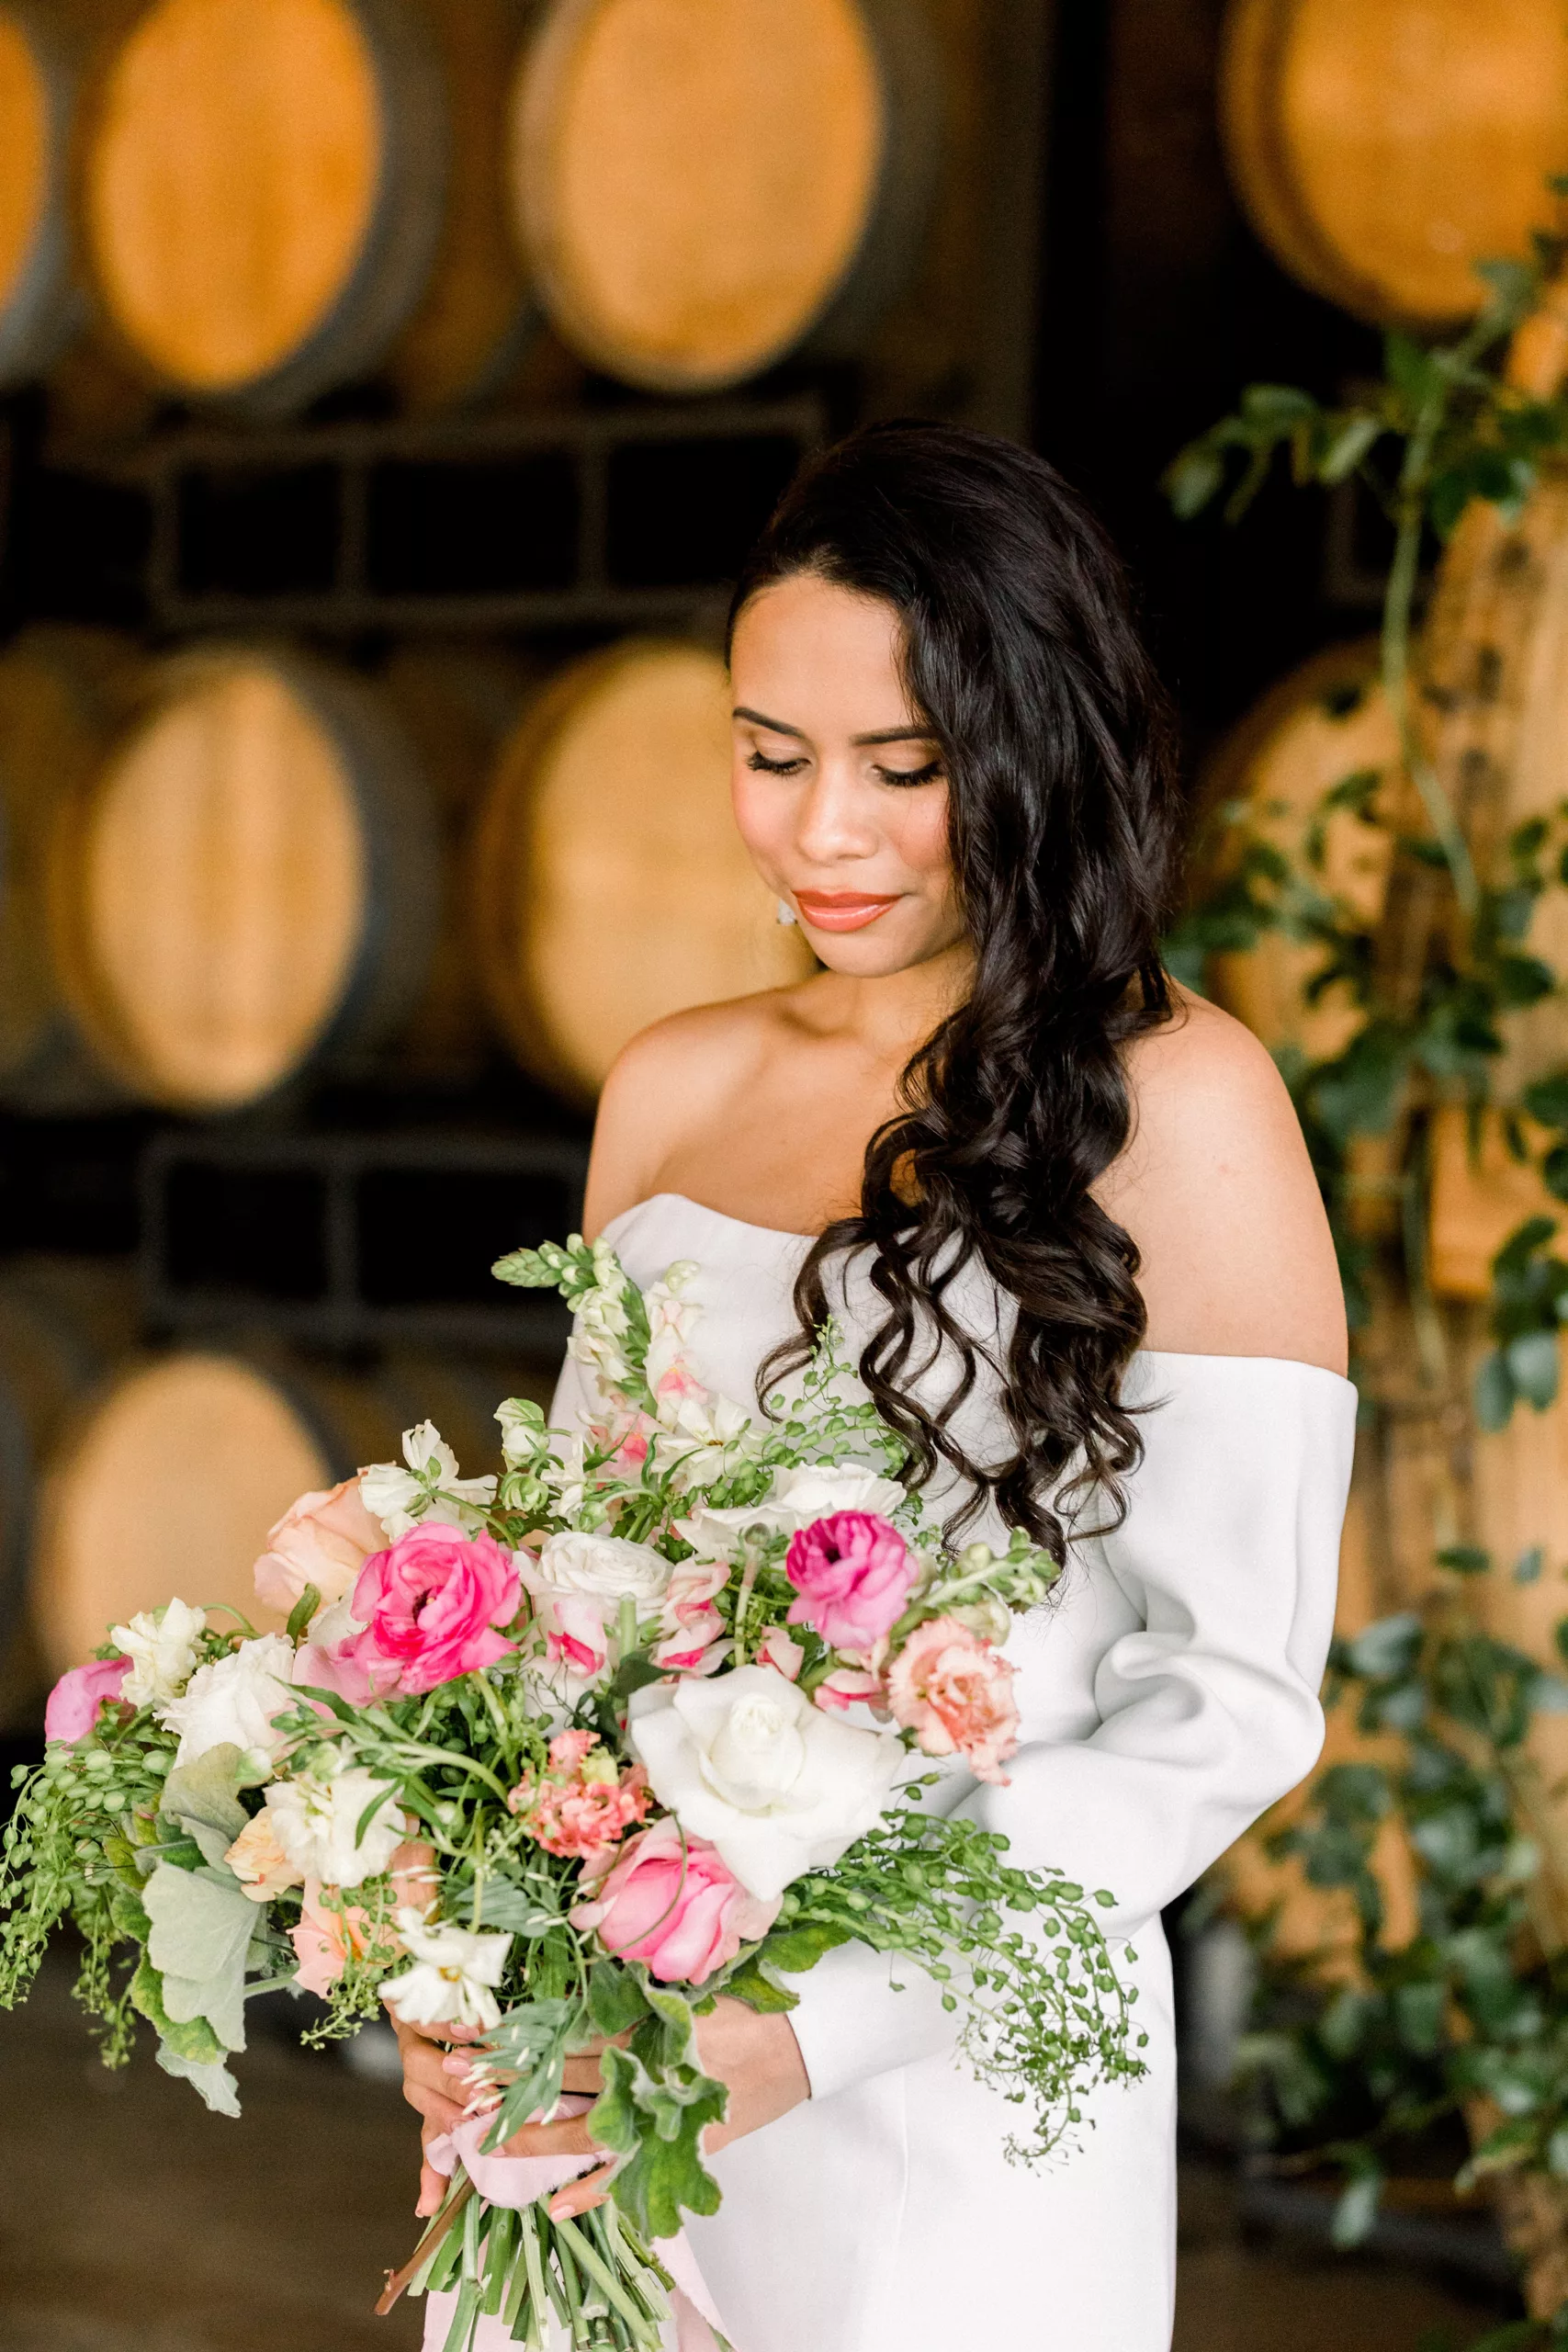 A bride gazes down at her bouquet in her hands while standing in a room full of wine barrels at a Chateau Elan Wedding